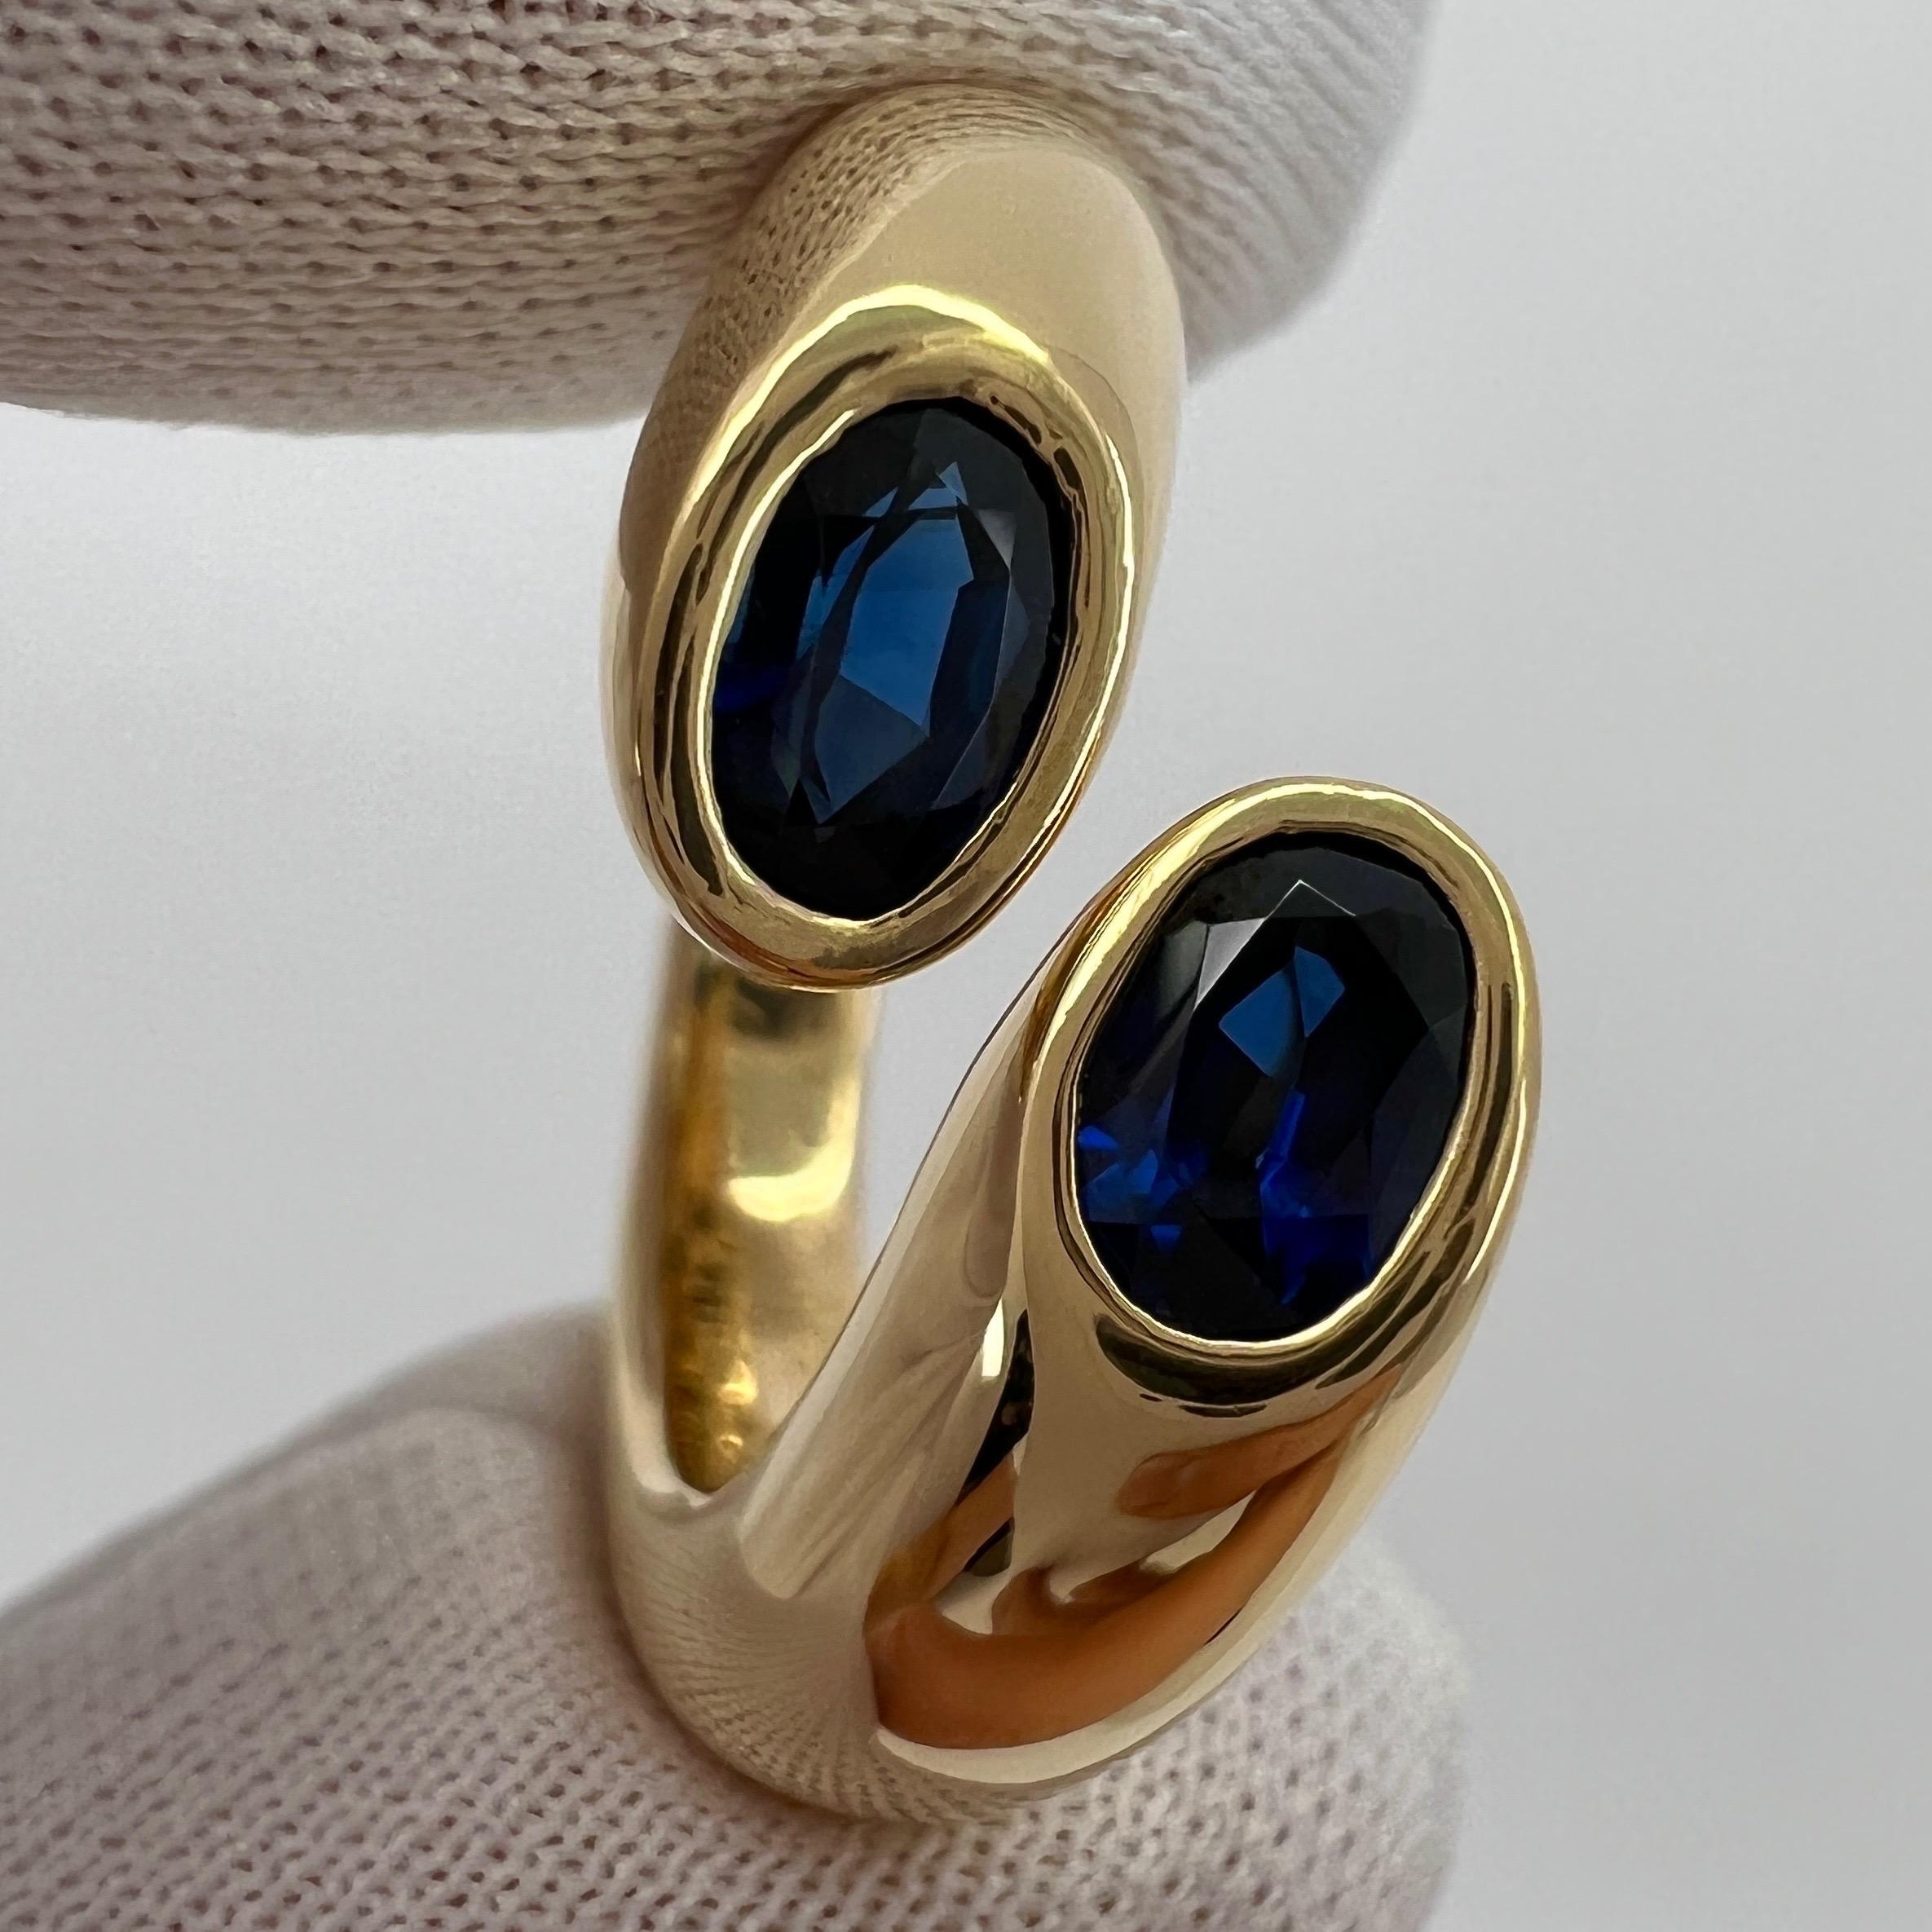 Rare Vintage Cartier Deep Blue Sapphire 18k Yellow Gold Bypass Ring.

Stunning yellow gold ring set with 2 fine deep blue oval cut sapphires. Fine jewellery houses like Cartier only use the finest of gemstones in their jewellery and these sapphires